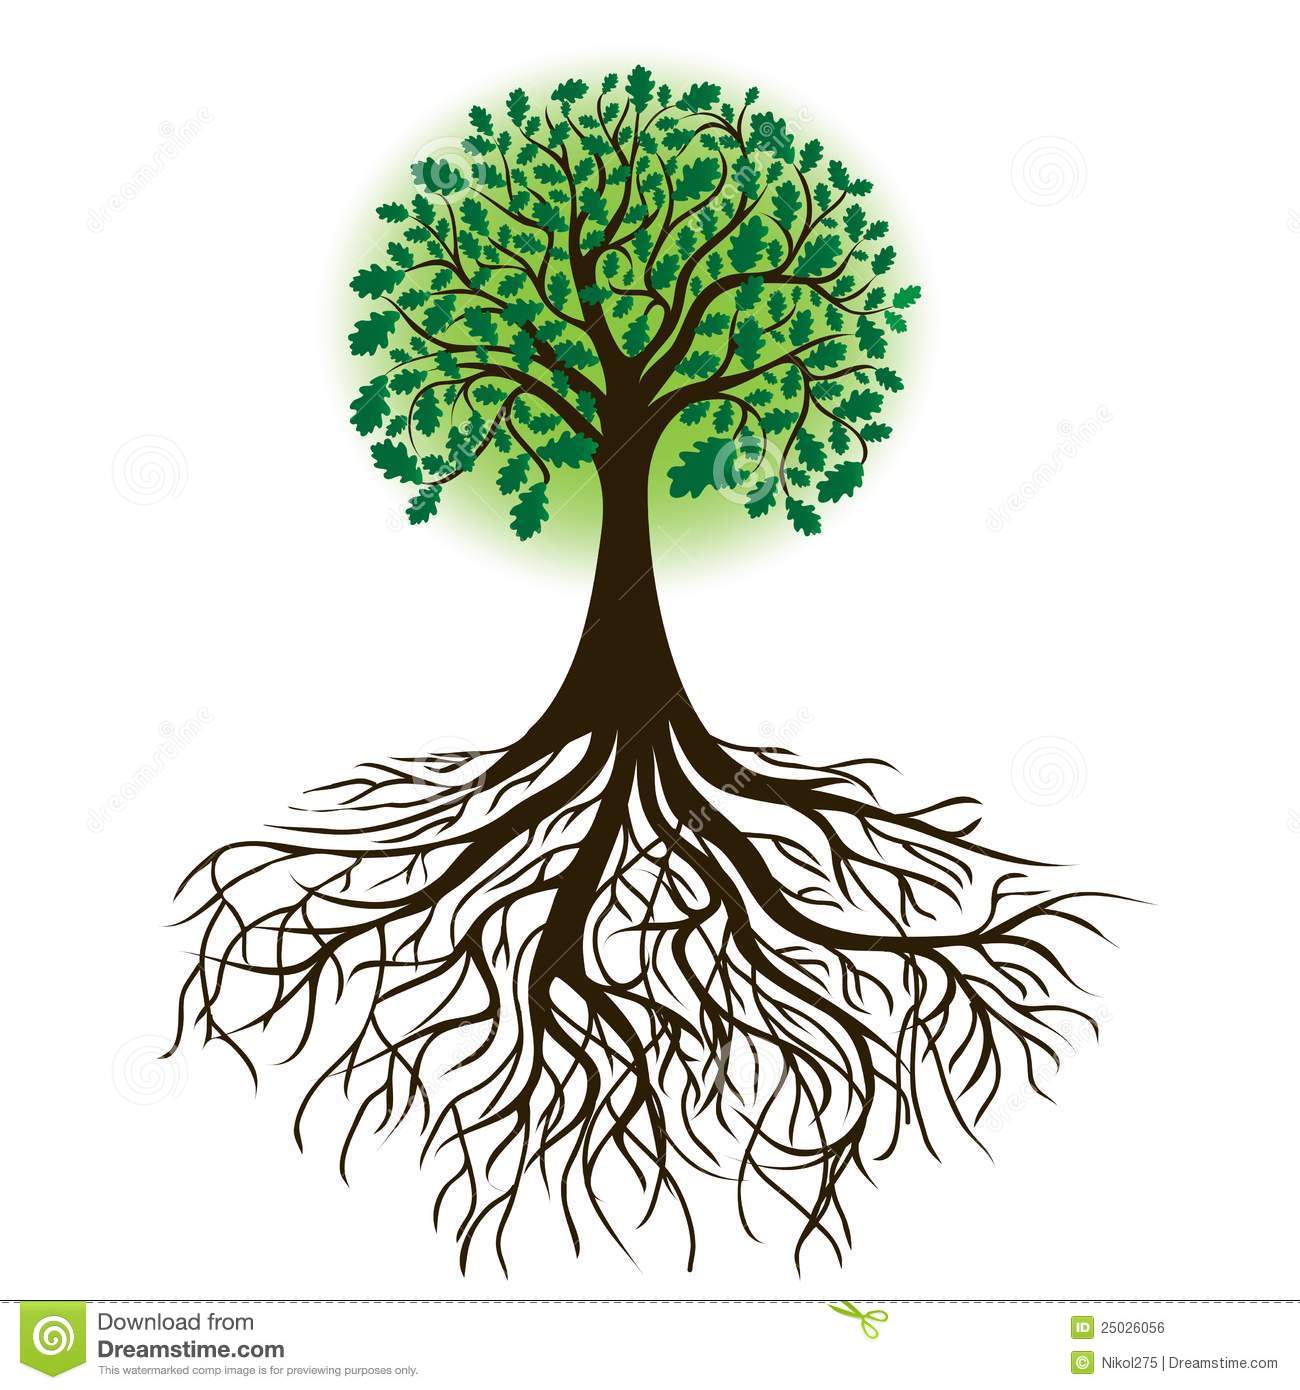 Tree Root clipart #15, Download drawings